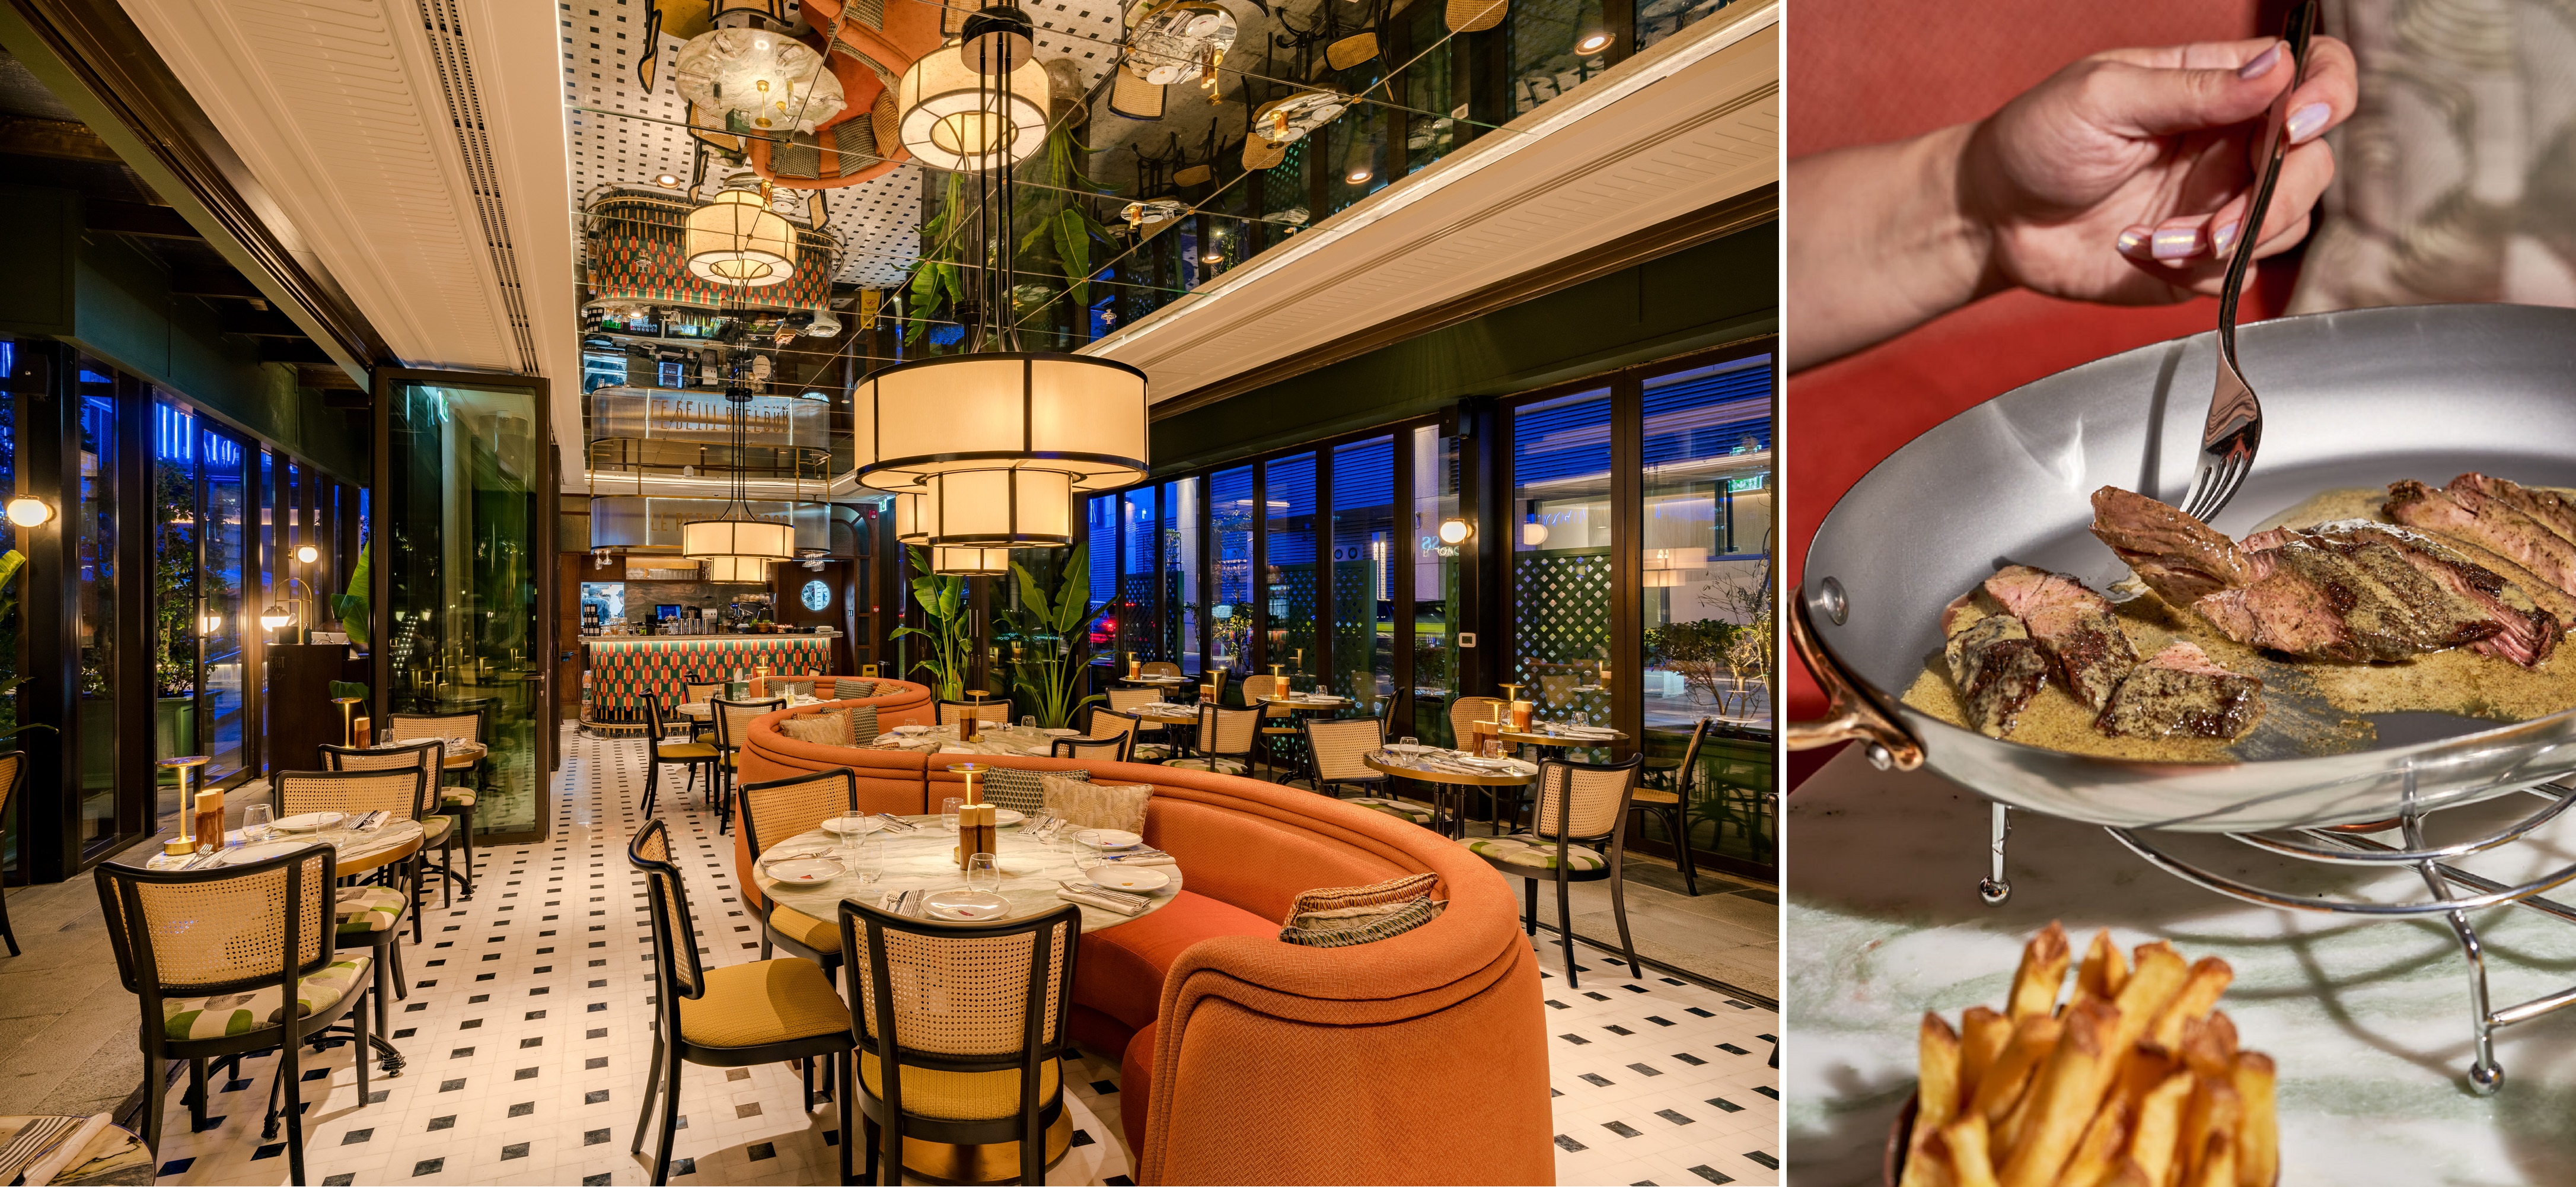 Iconic Beefbar Has Brought A New Concept Le Petit Beefbar to the Heart of  DIFC